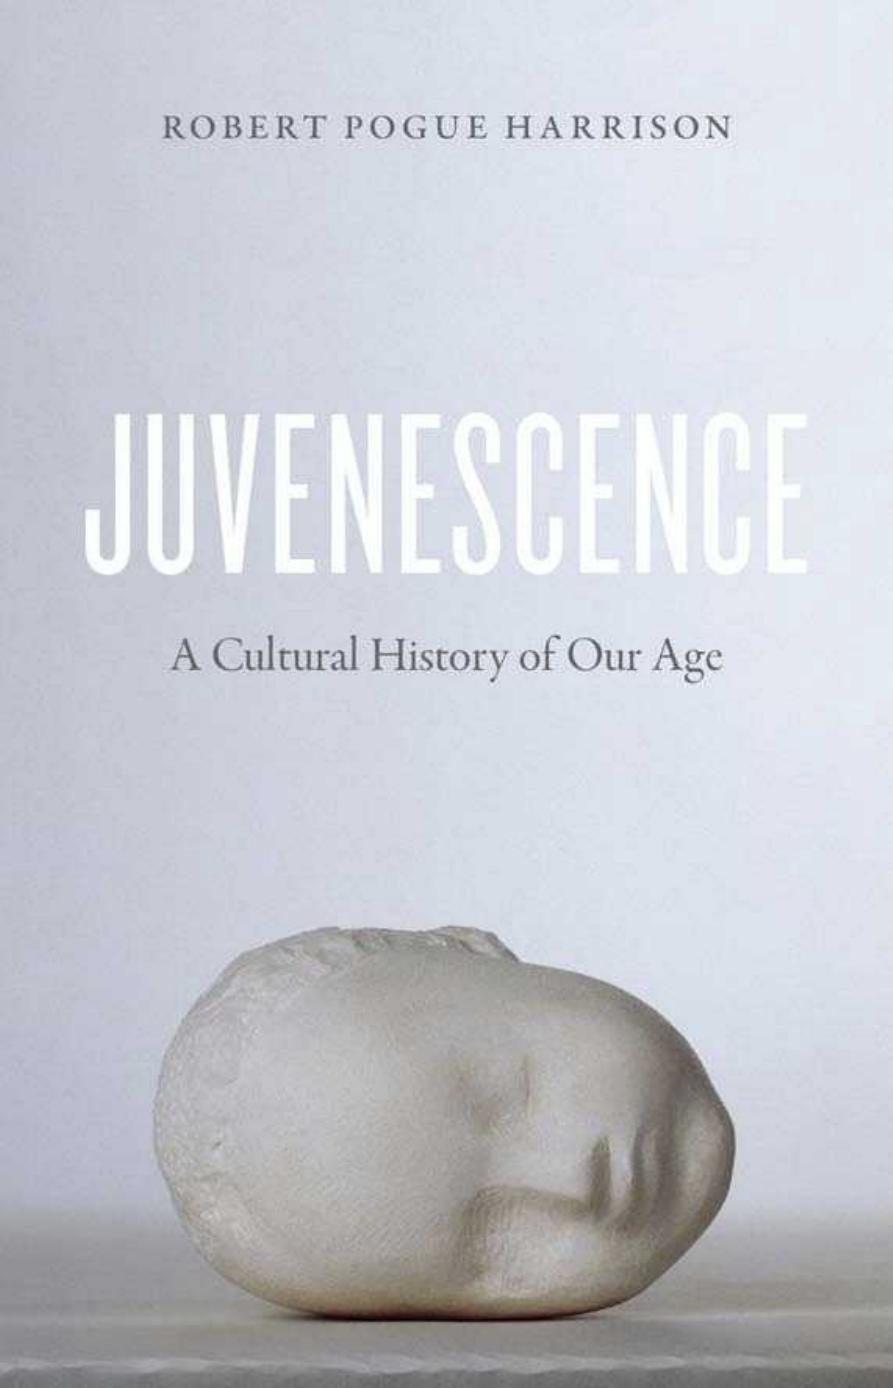 Juvenescence: A Cultural History of Our Age by Robert Pogue Harrison